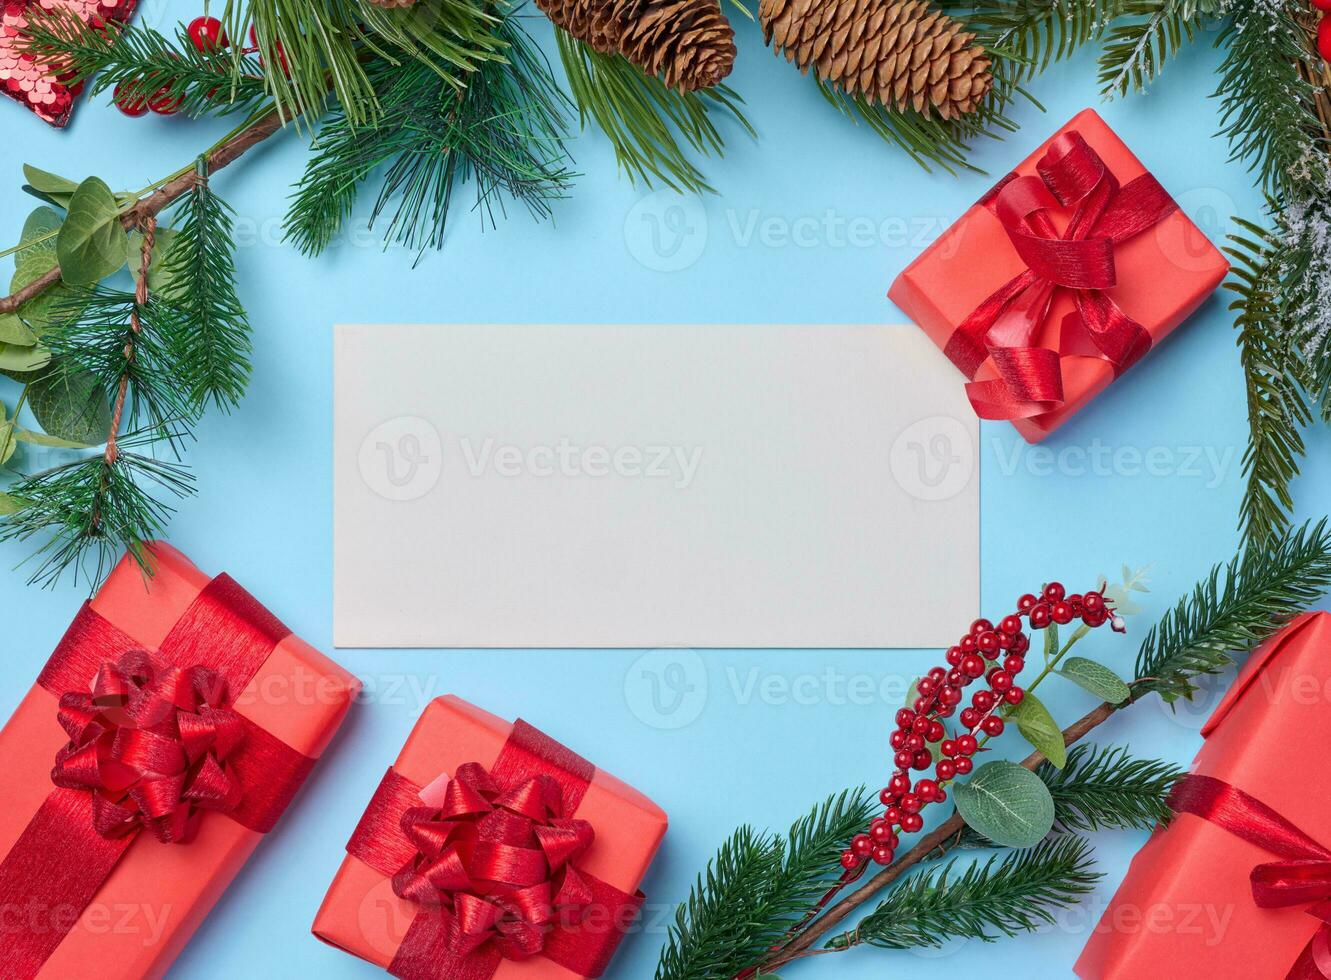 Christmas decor, gifts wrapped in red paper and a letter on a blue background, top view photo